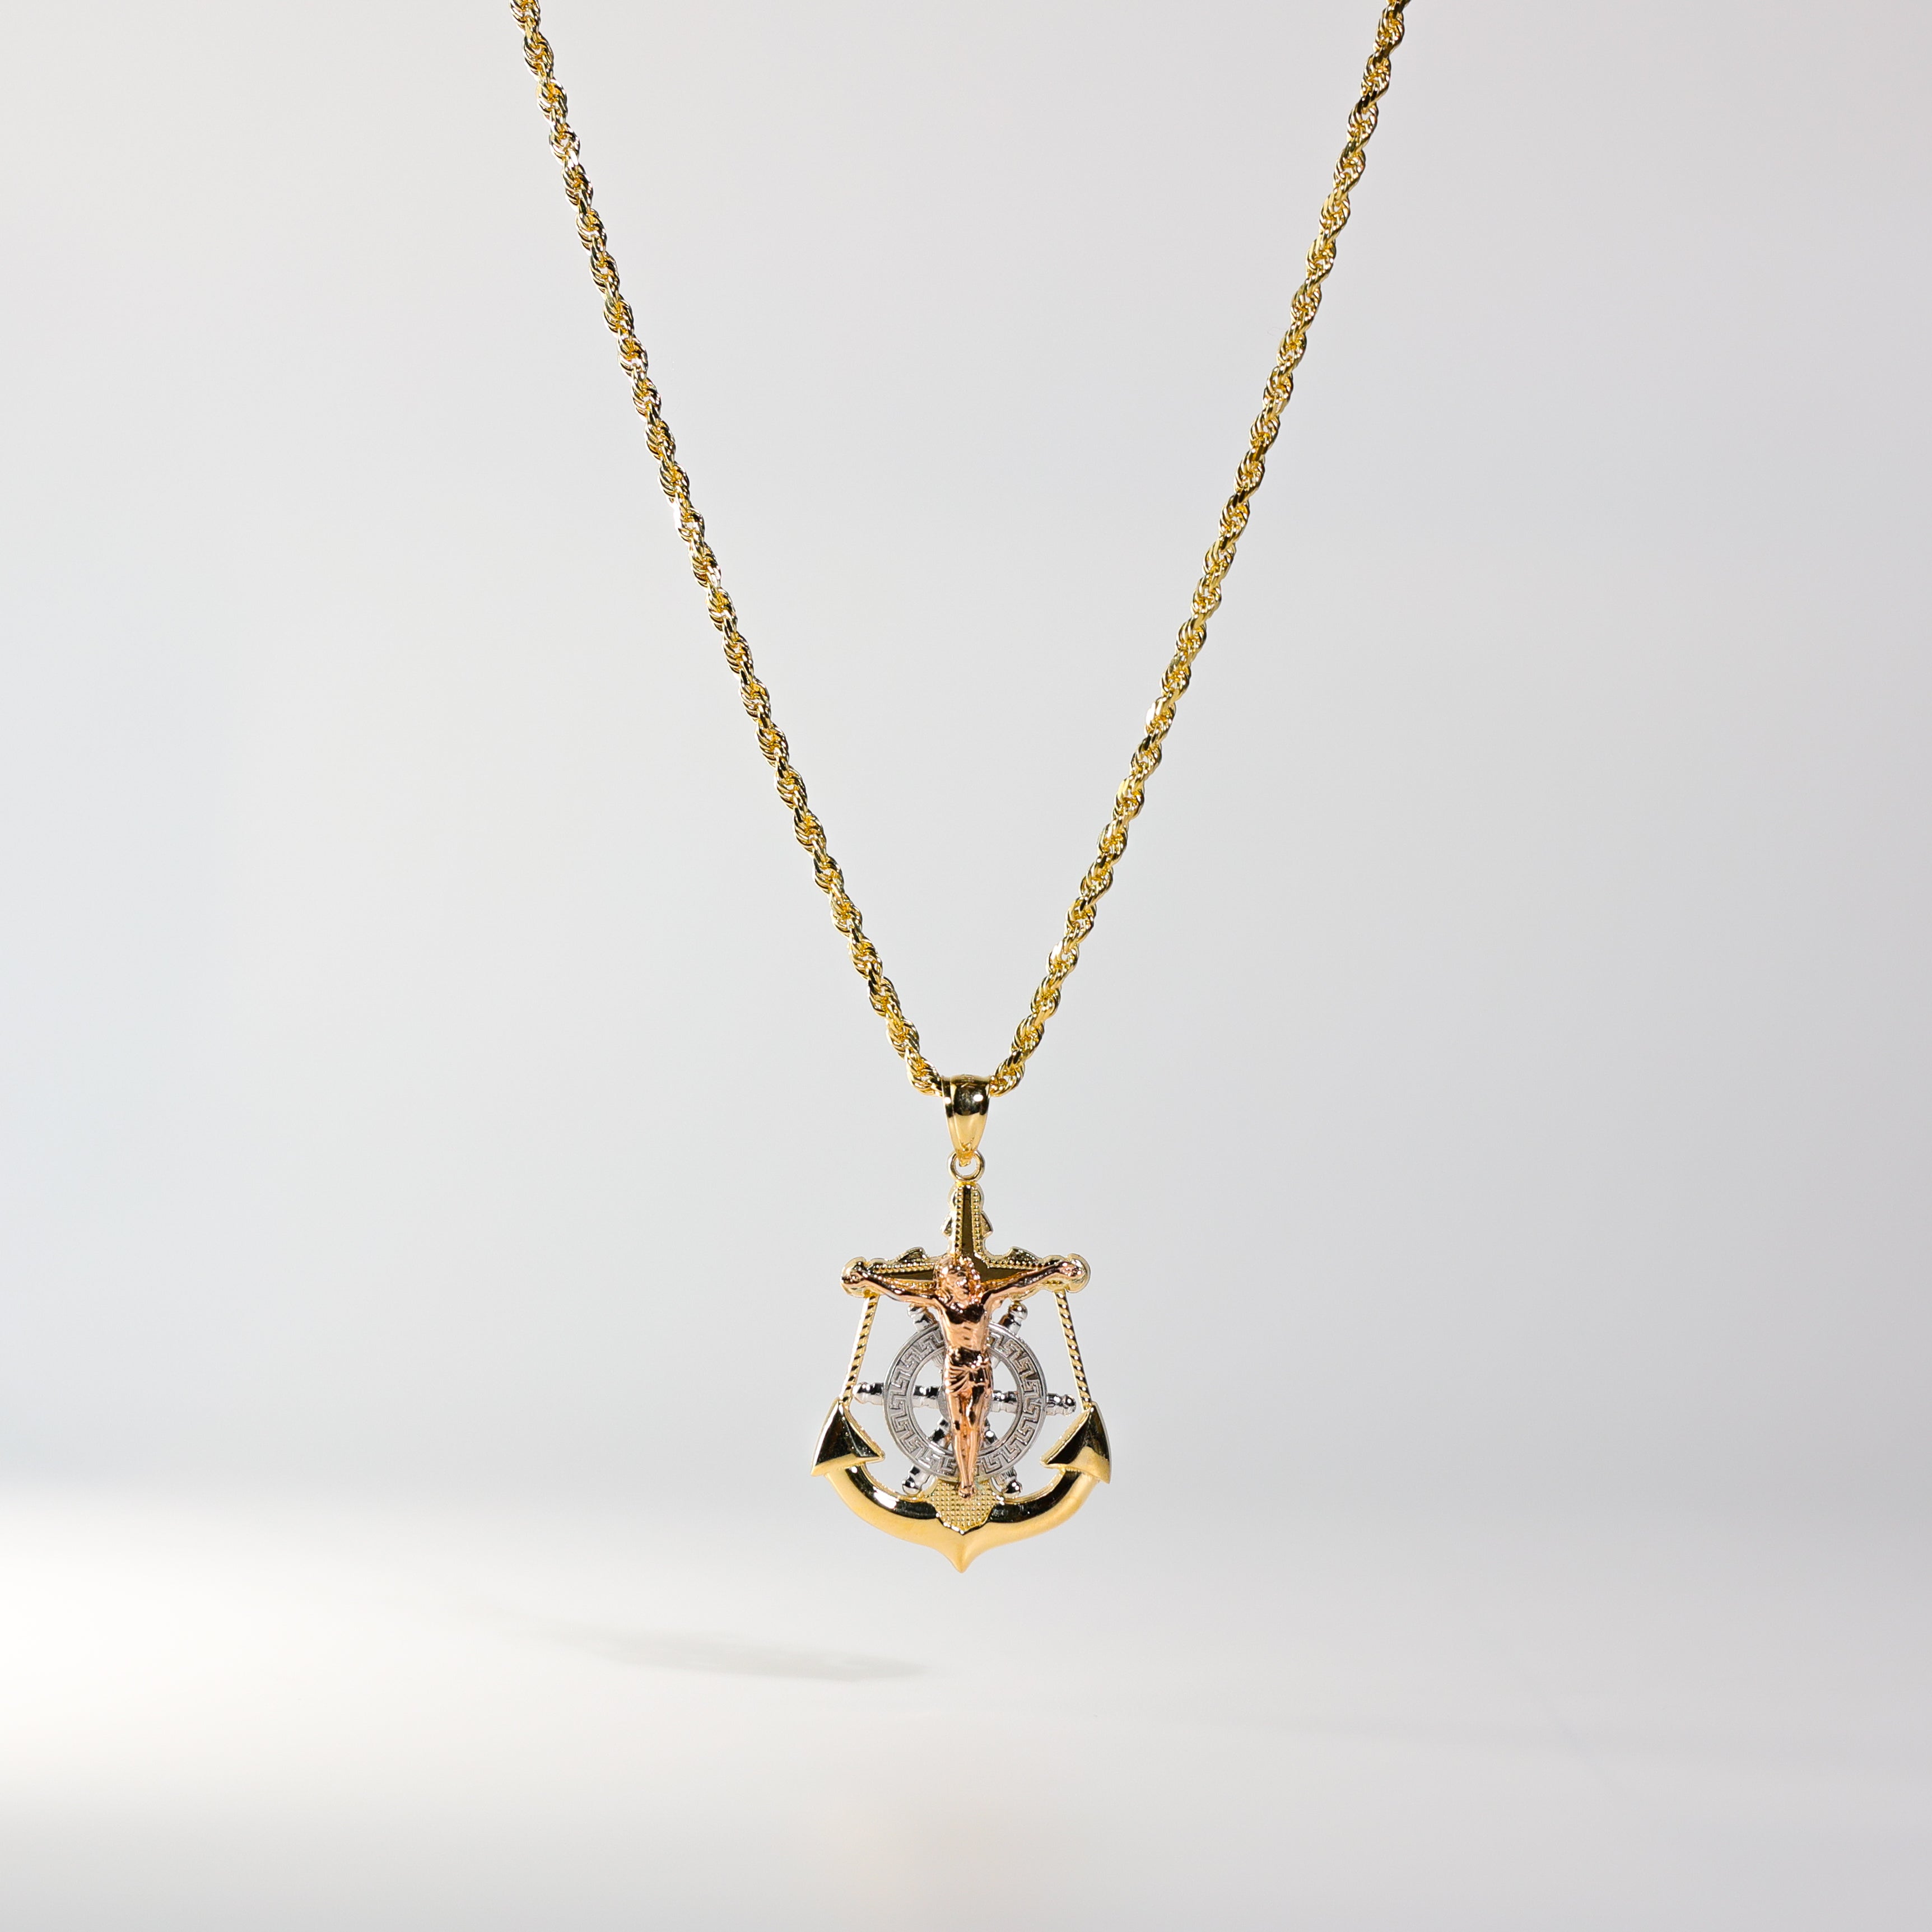 Gold Crucifix Anchor Mariner Pendant Model-0113 - Charlie & Co. Jewelry